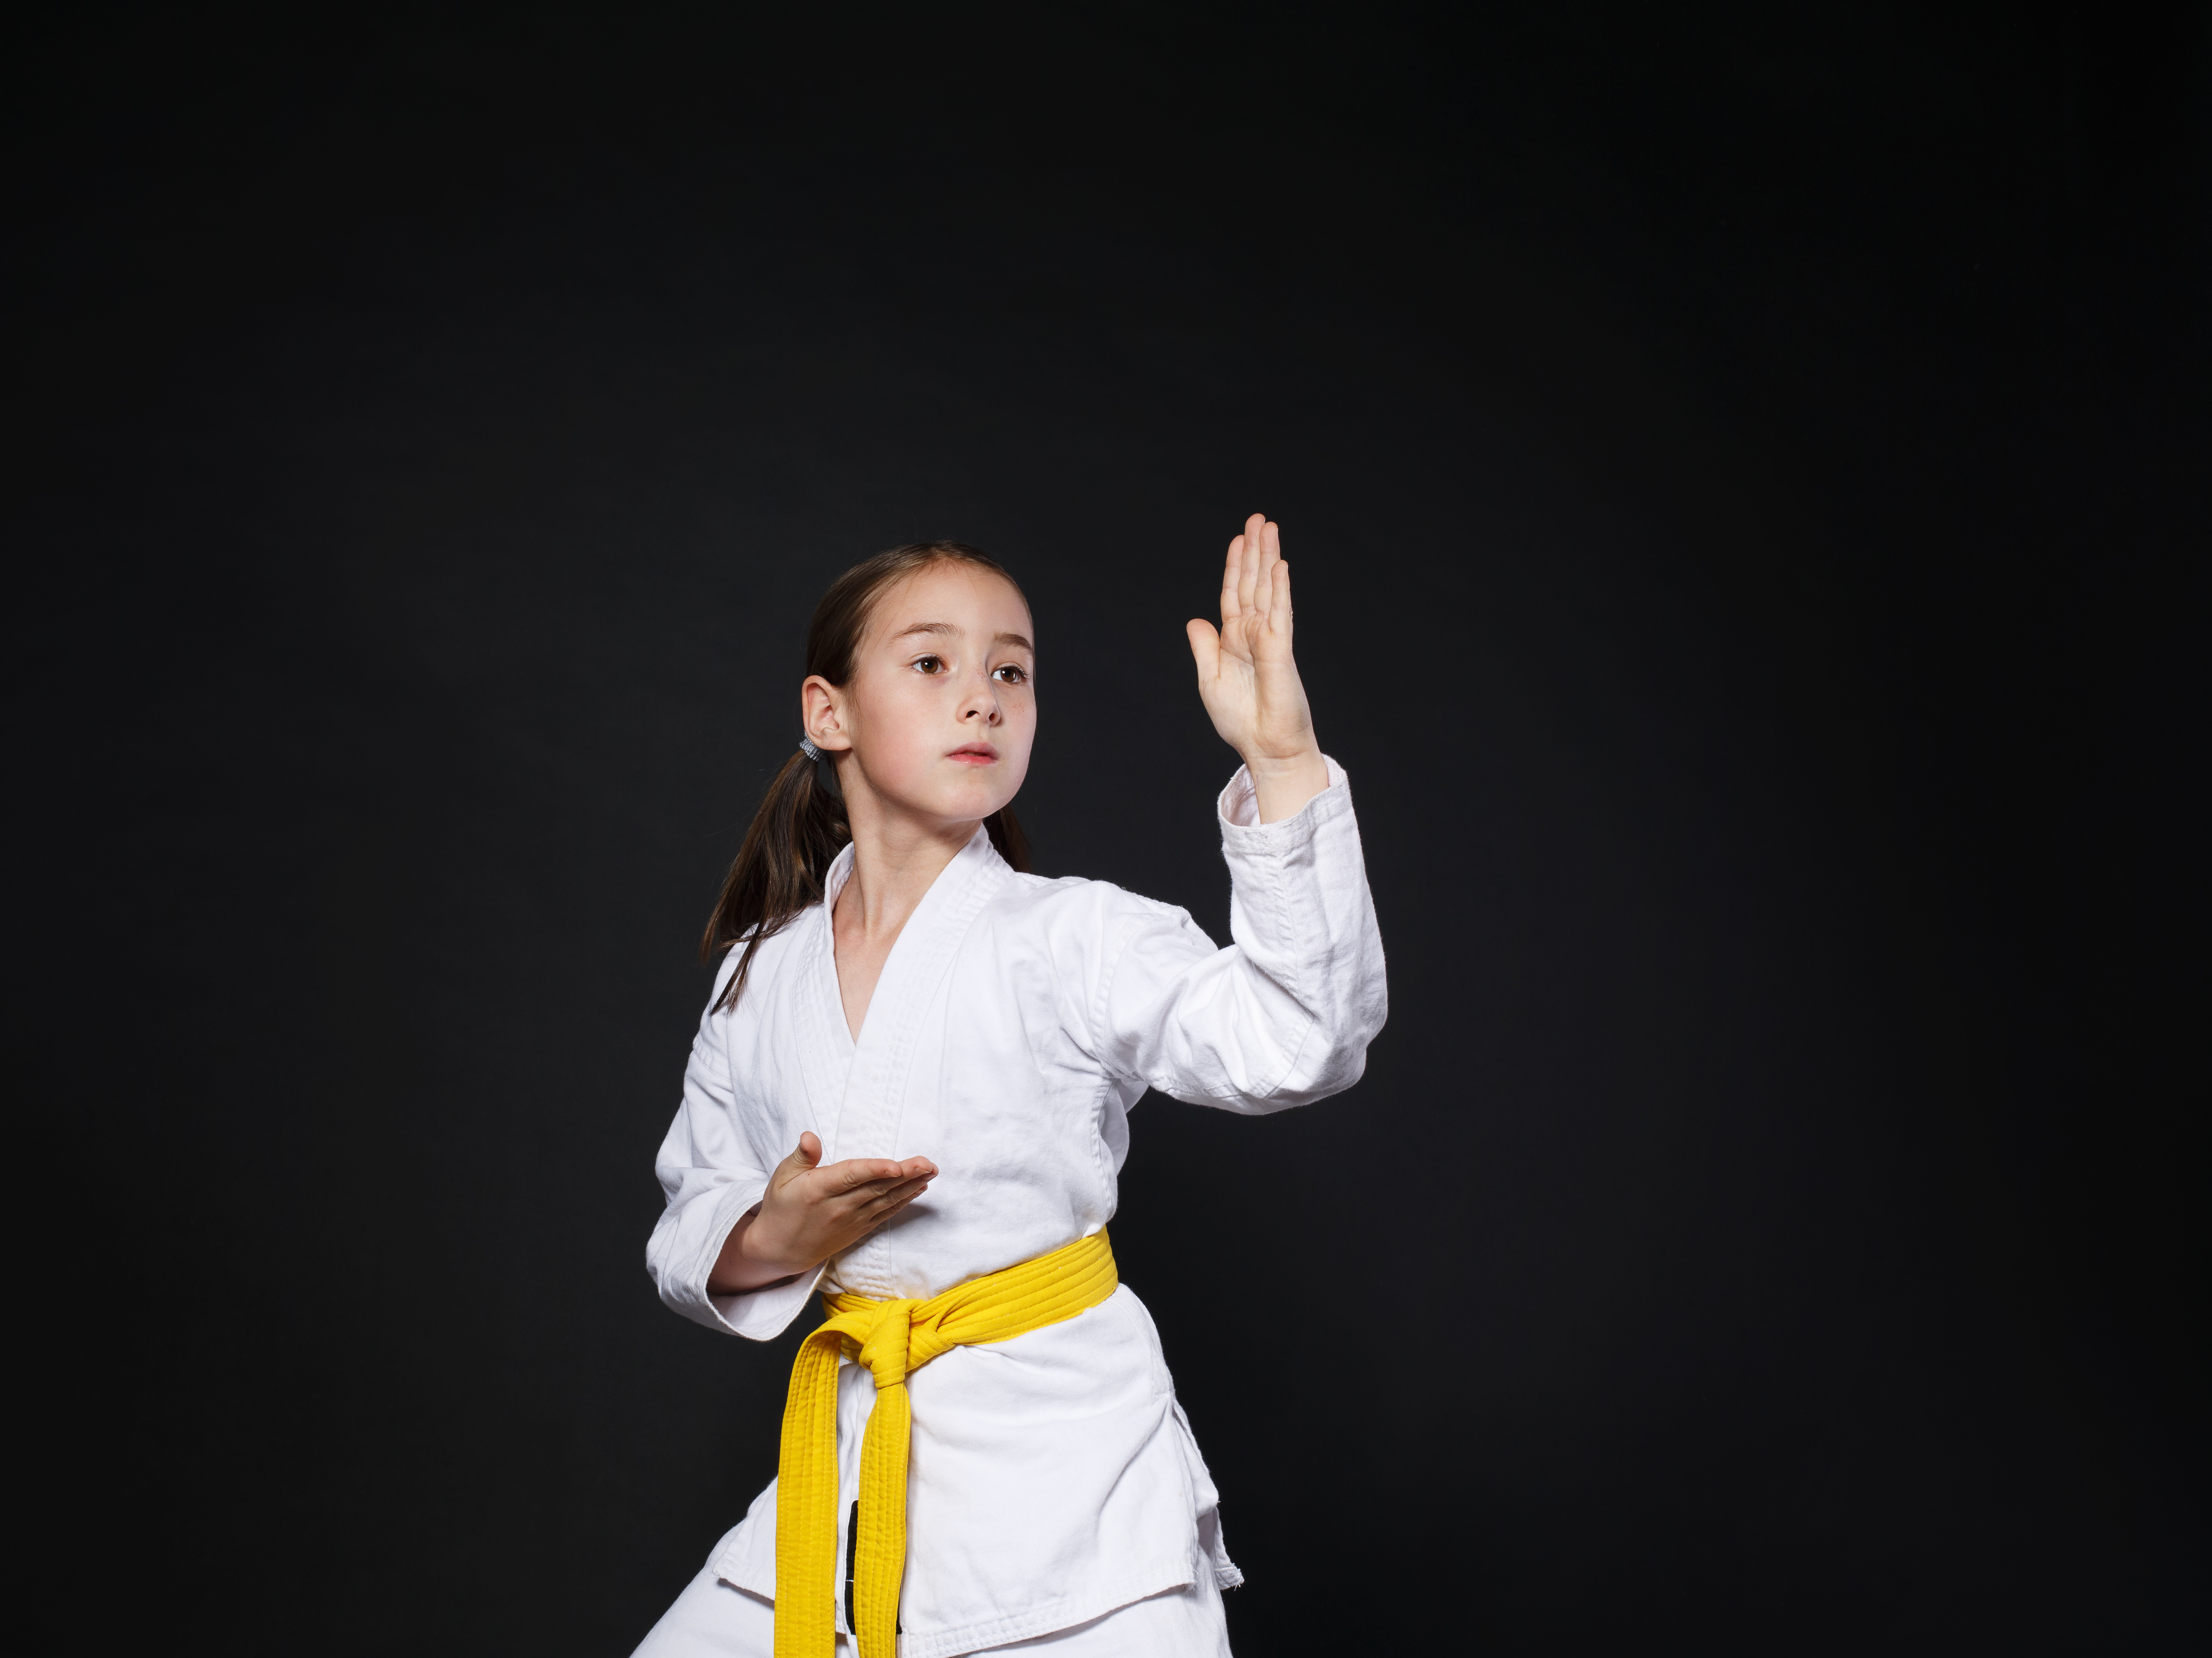 Little girl in karate suit kimono in studio at black background. Female child shows judo or karate stans in white uniform with yellow belt. Individual martial art sport for kids. Waist up portrait